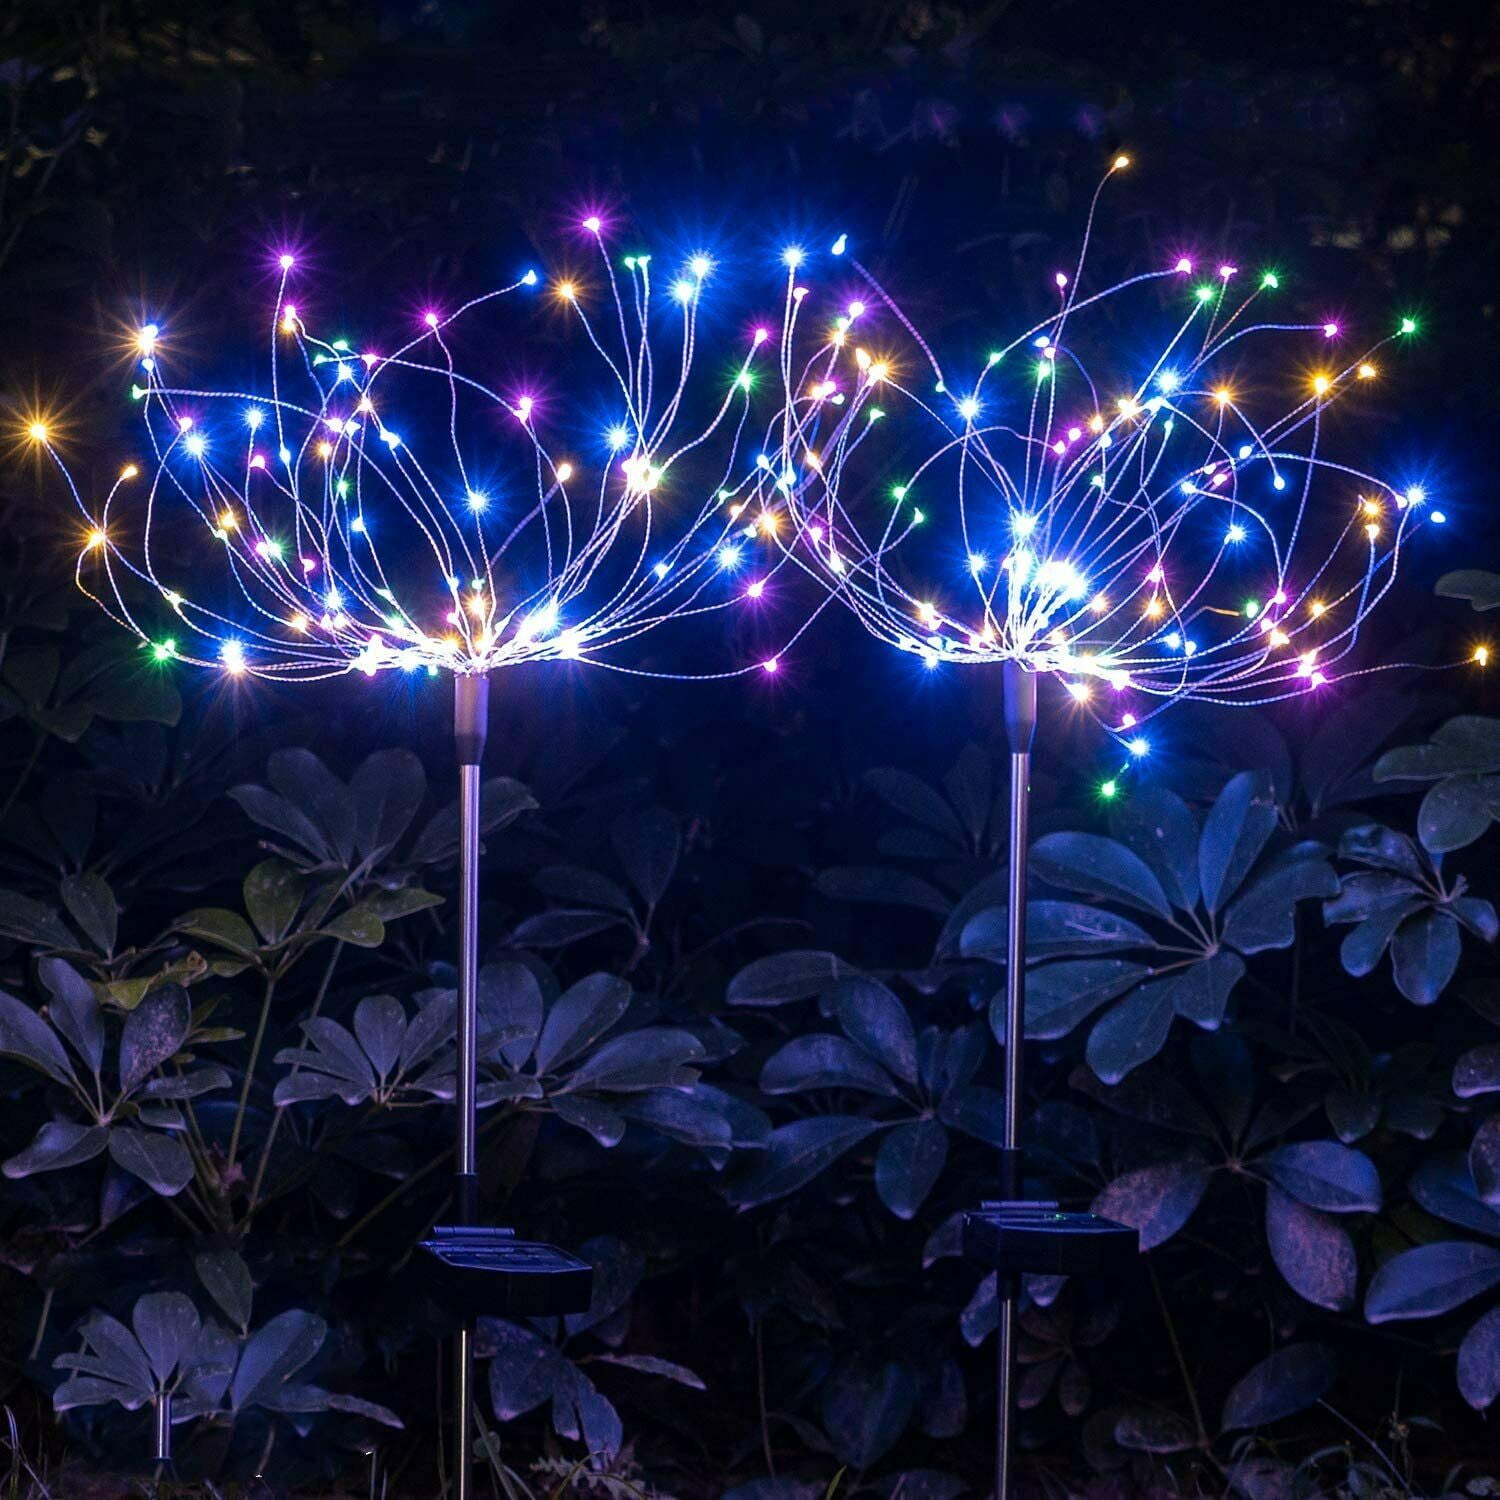 Solar Firework Lights 105 LED-Powered 35 Copper Wires DIY Flowers Fireworks Stars for Walkway Pathway Backyard Christmas Party Decor Warm White 2 Pack Amashop Outdoor-Garden-Decorative-Lights